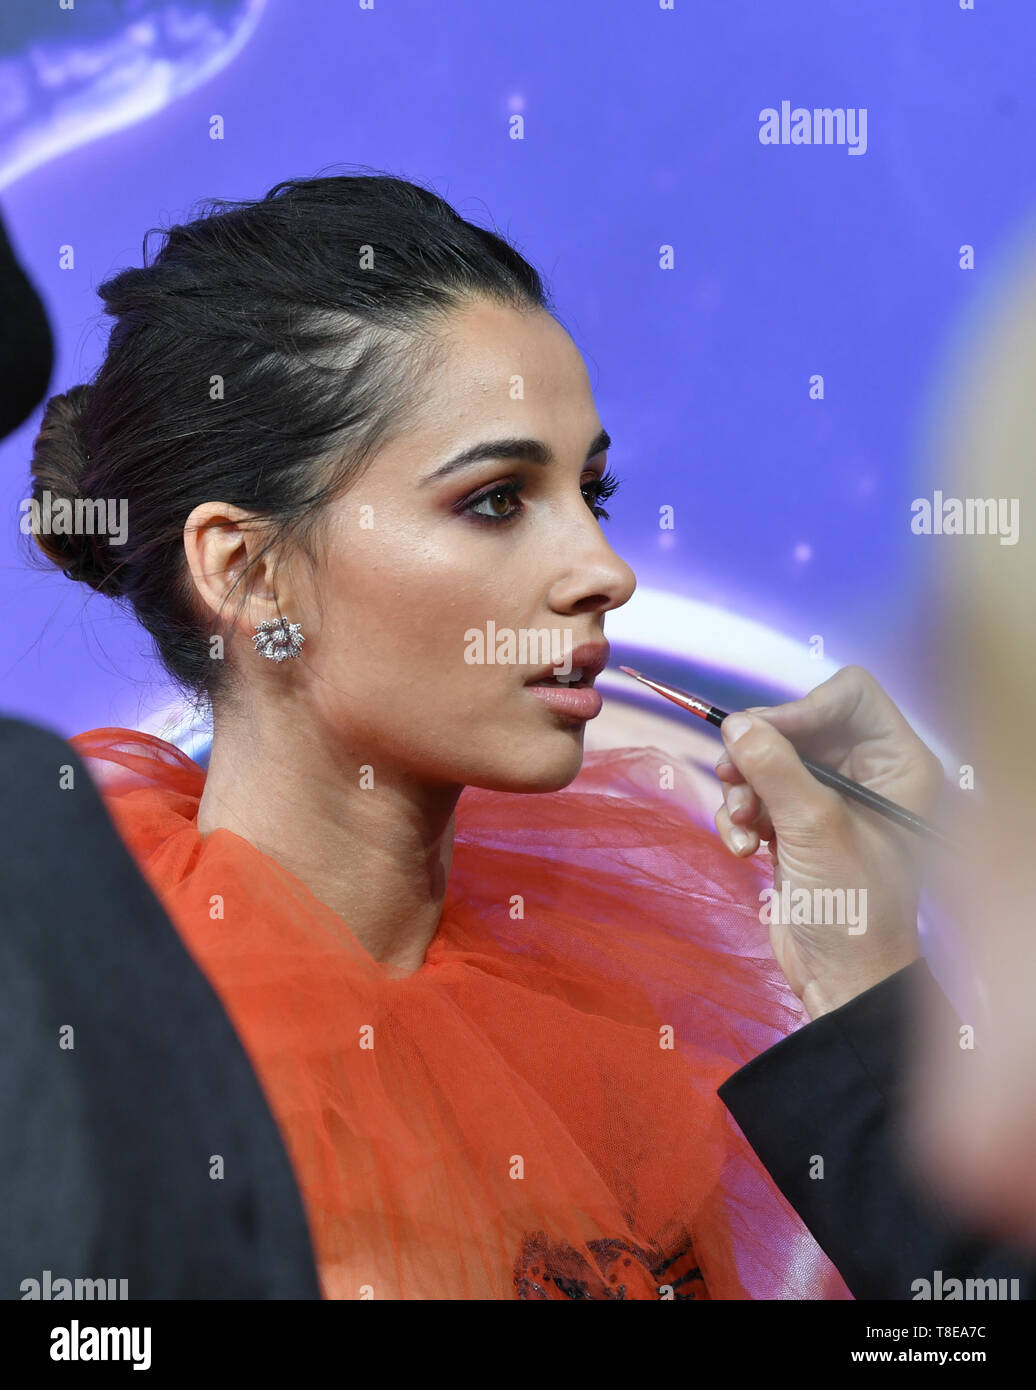 Berlin, Germany. 11th May, 2019. Actress Naomi Scott is painted on the carpet during the gala screening of the film 'Aladdin' at the cinema UCI Luxe Mercedes Square. The film will be released in German cinemas on 23.05.2019. The new Disney film is a real film adaptation of the 1992 cartoon of the same name and is based on the story Aladdin and the magic lamp from the fairy tales of 1001 Nights. Credit: Jens Kalaene/dpa-Zentralbild/dpa/Alamy Live News Stock Photo